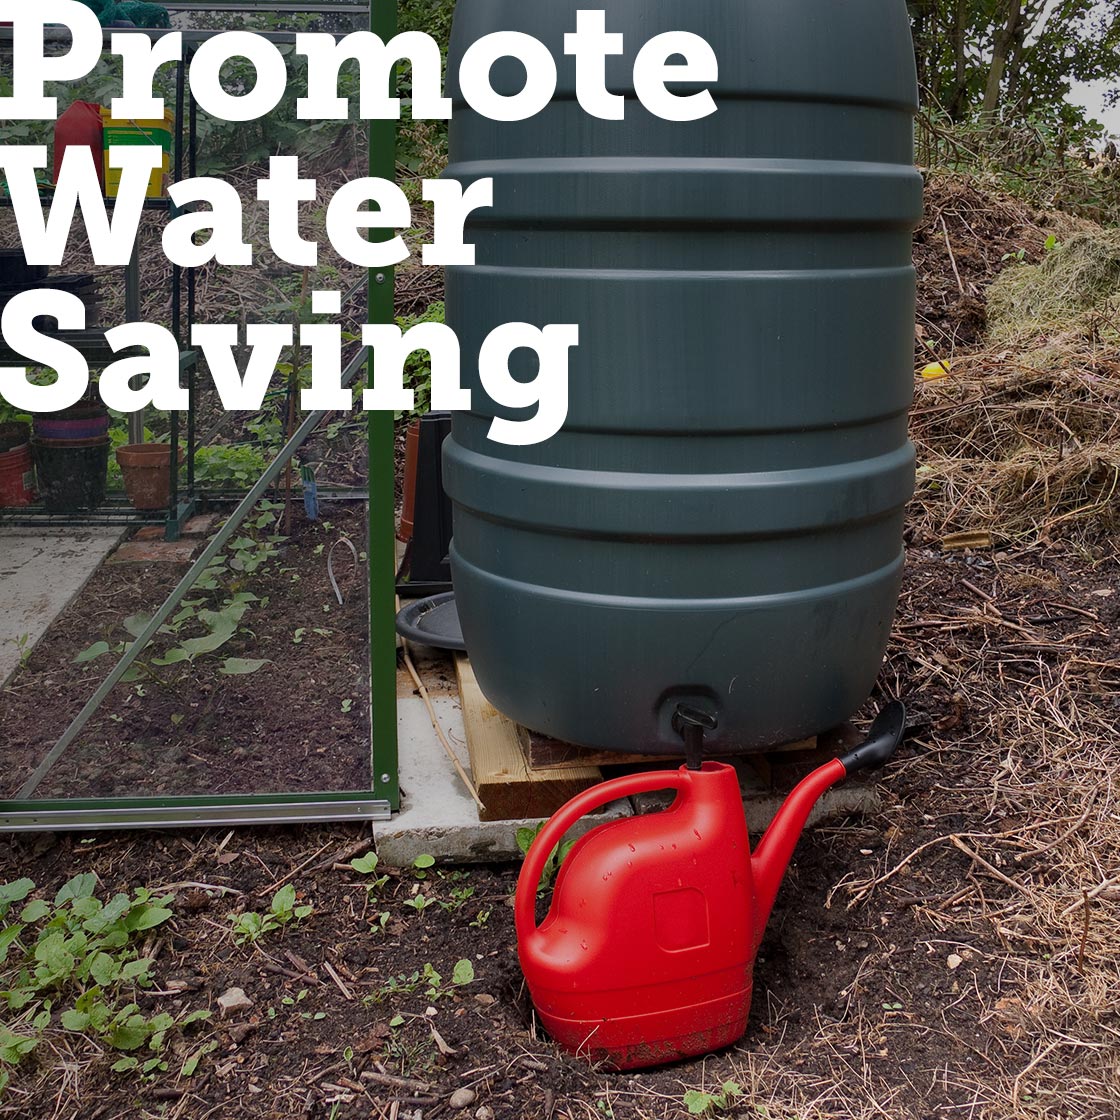 We will promote water saving products and use water recycling on our centres